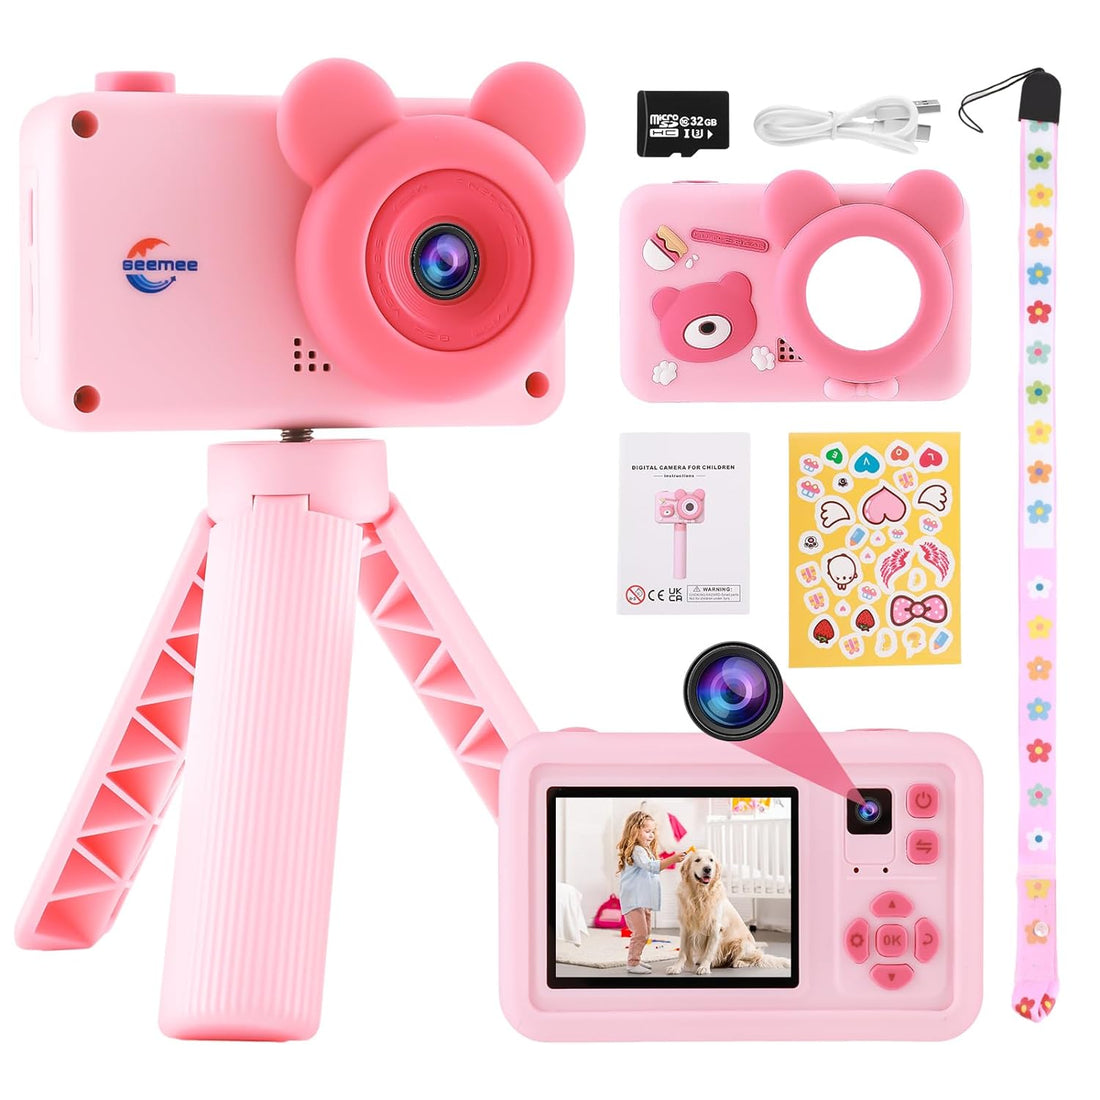 Seemee Kids Digital Camera with Bear Silicone Case and Tripod (Pink)